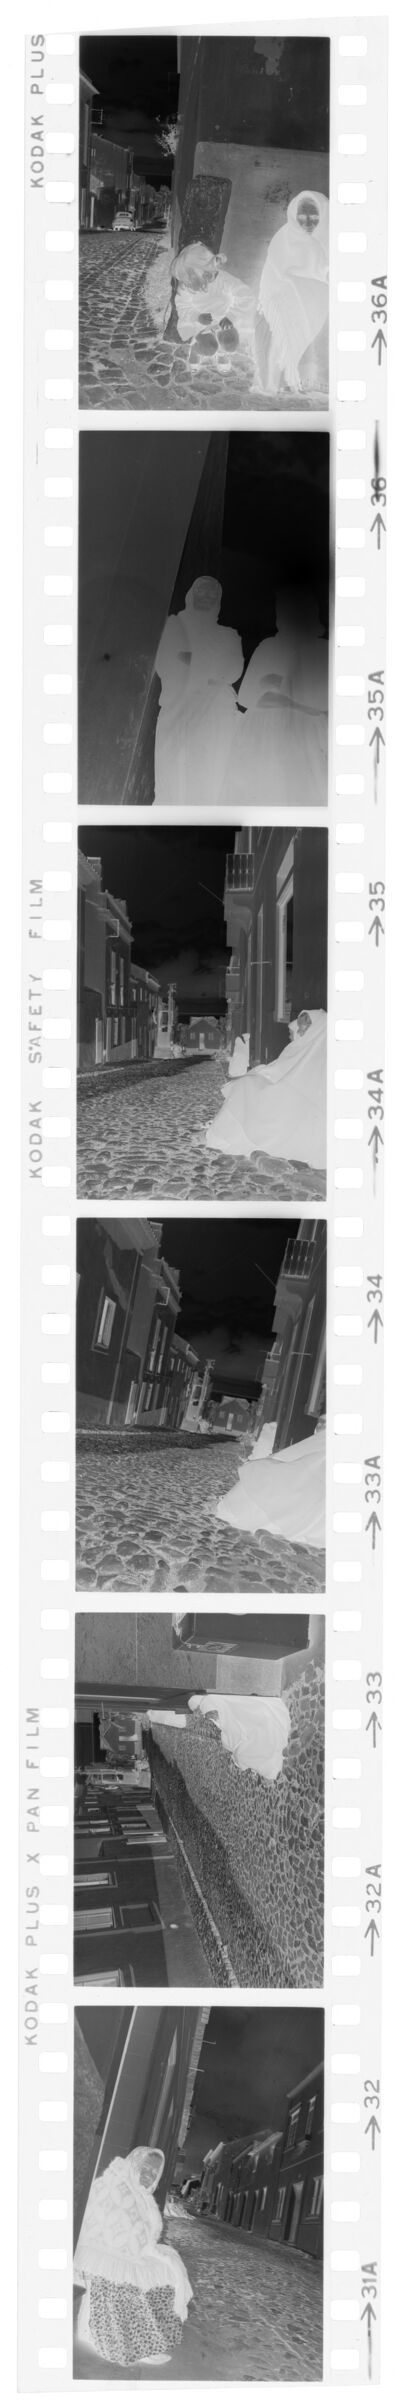 Untitled (Women And Children Sitting In Streets, Nazaré, Portugal)